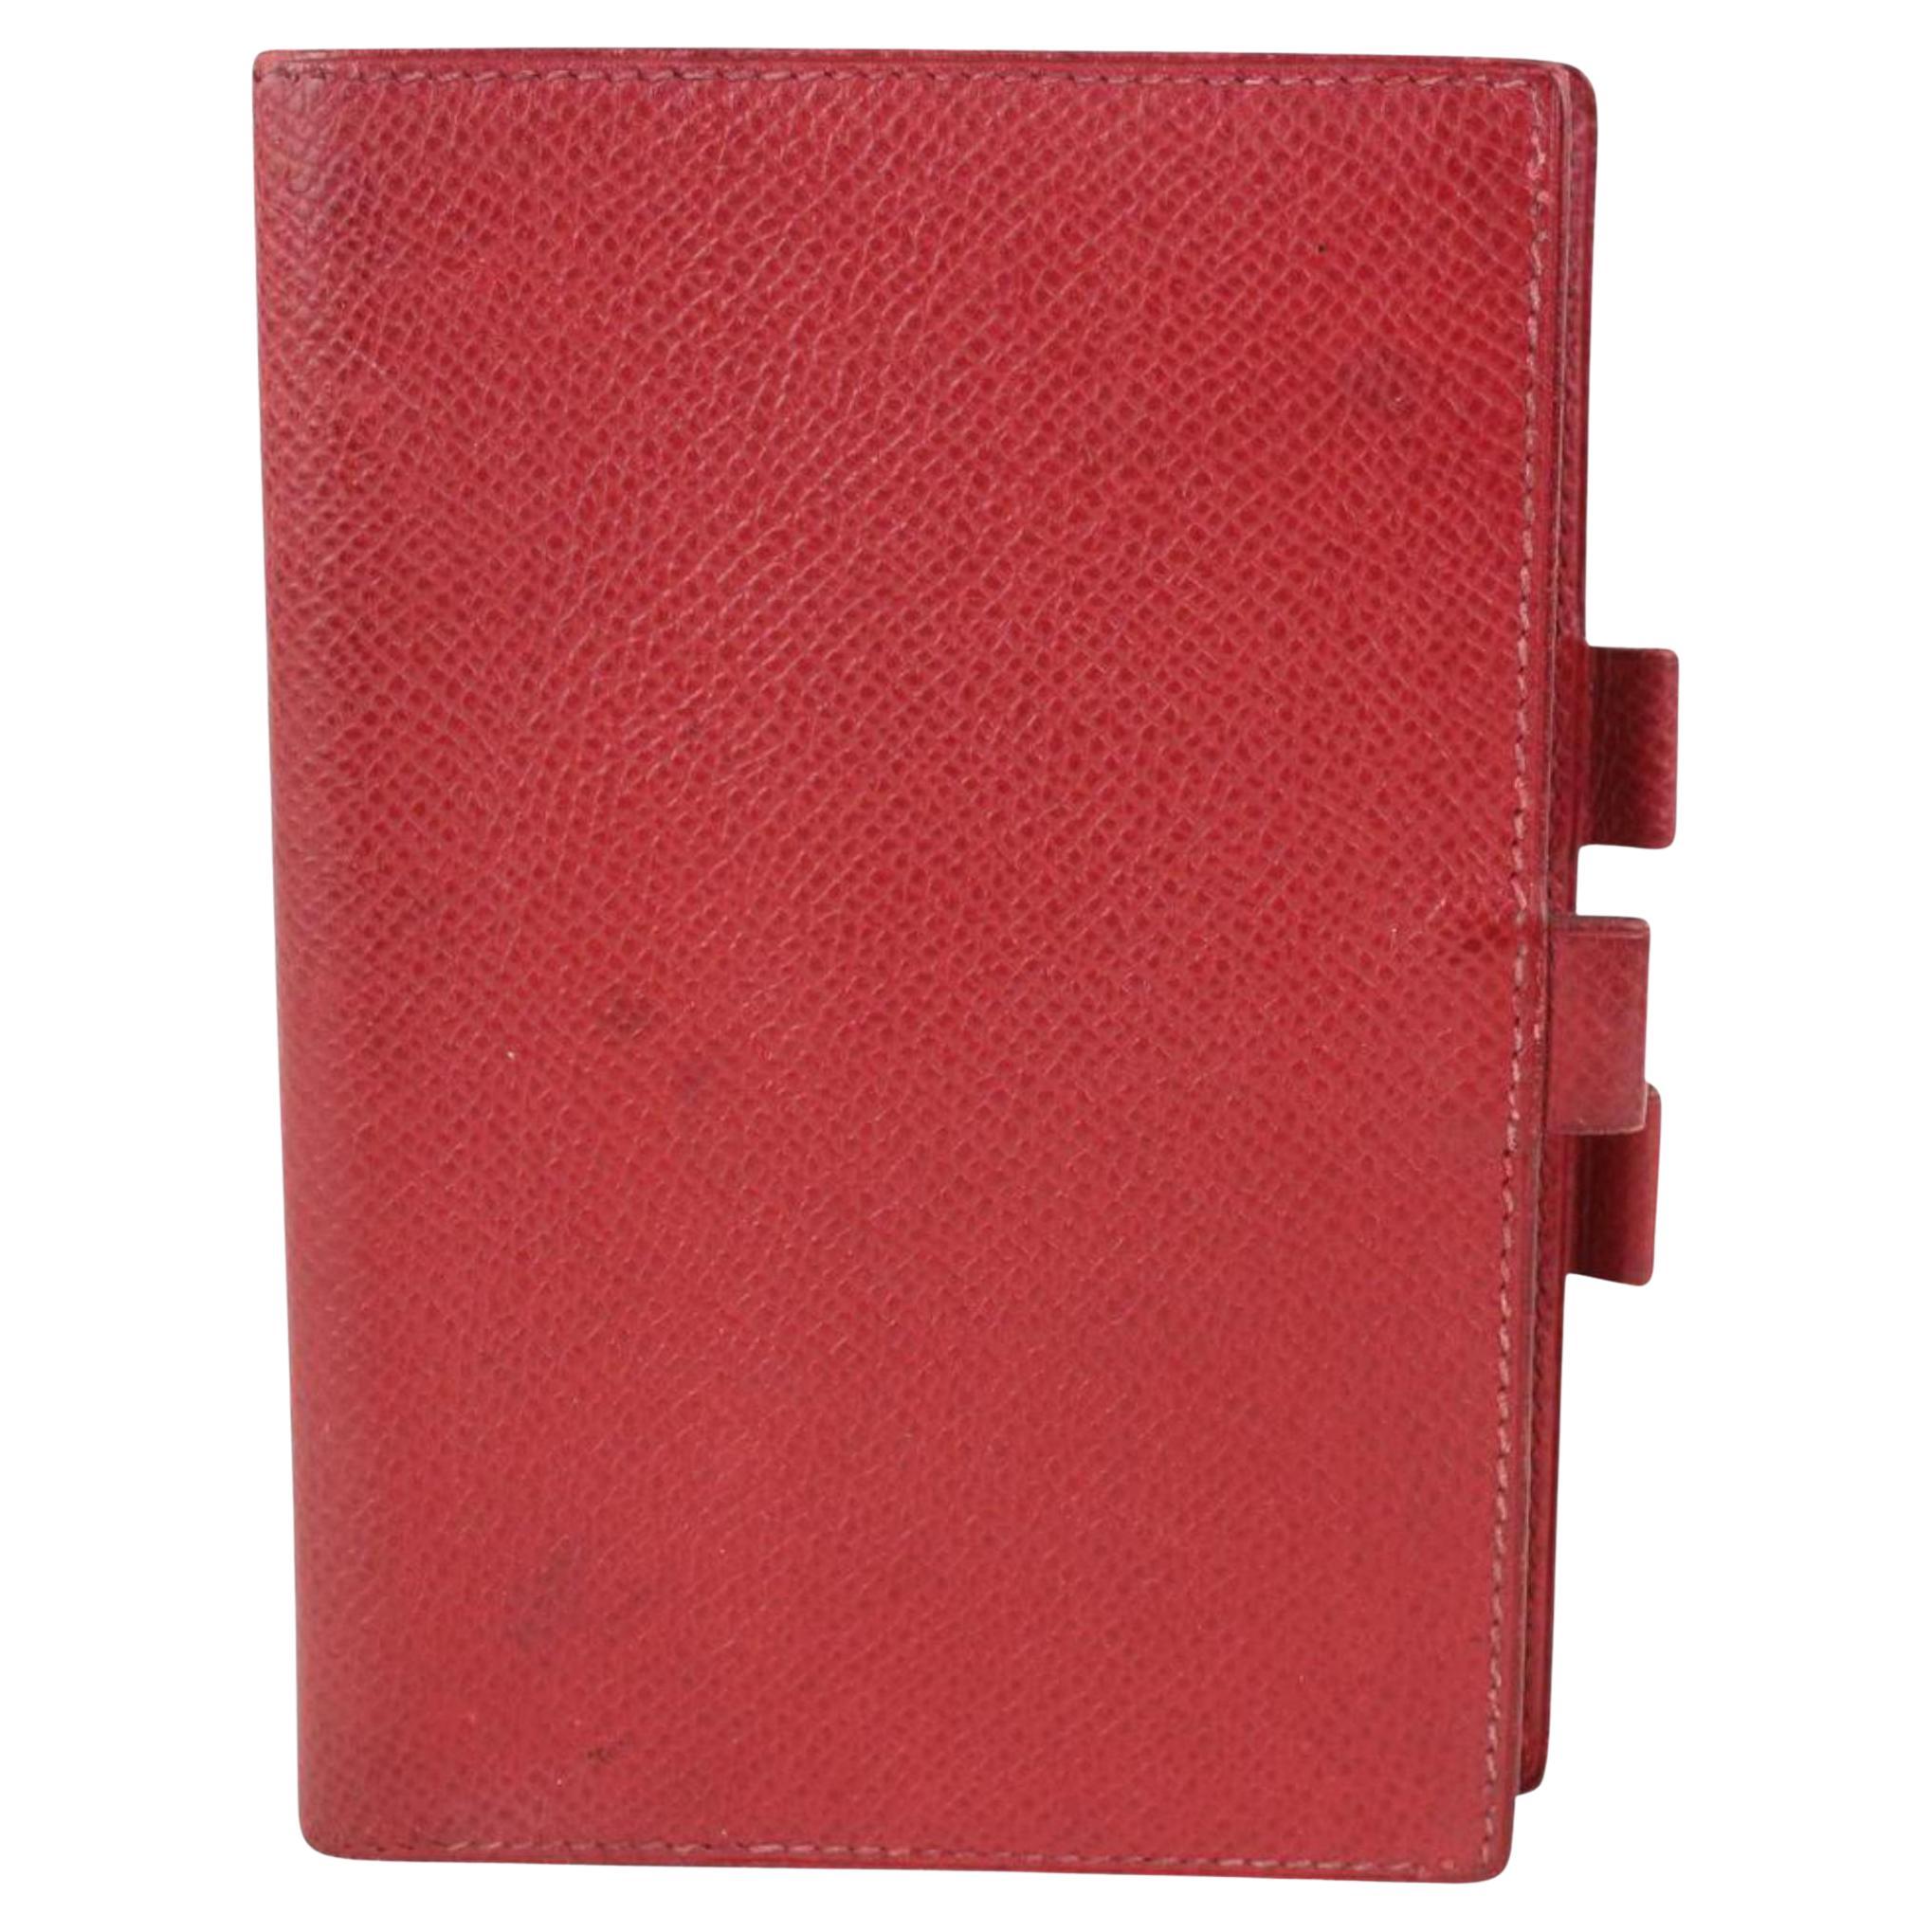 Hermès Small Red Epsom Leather Agenda 1020h36 For Sale